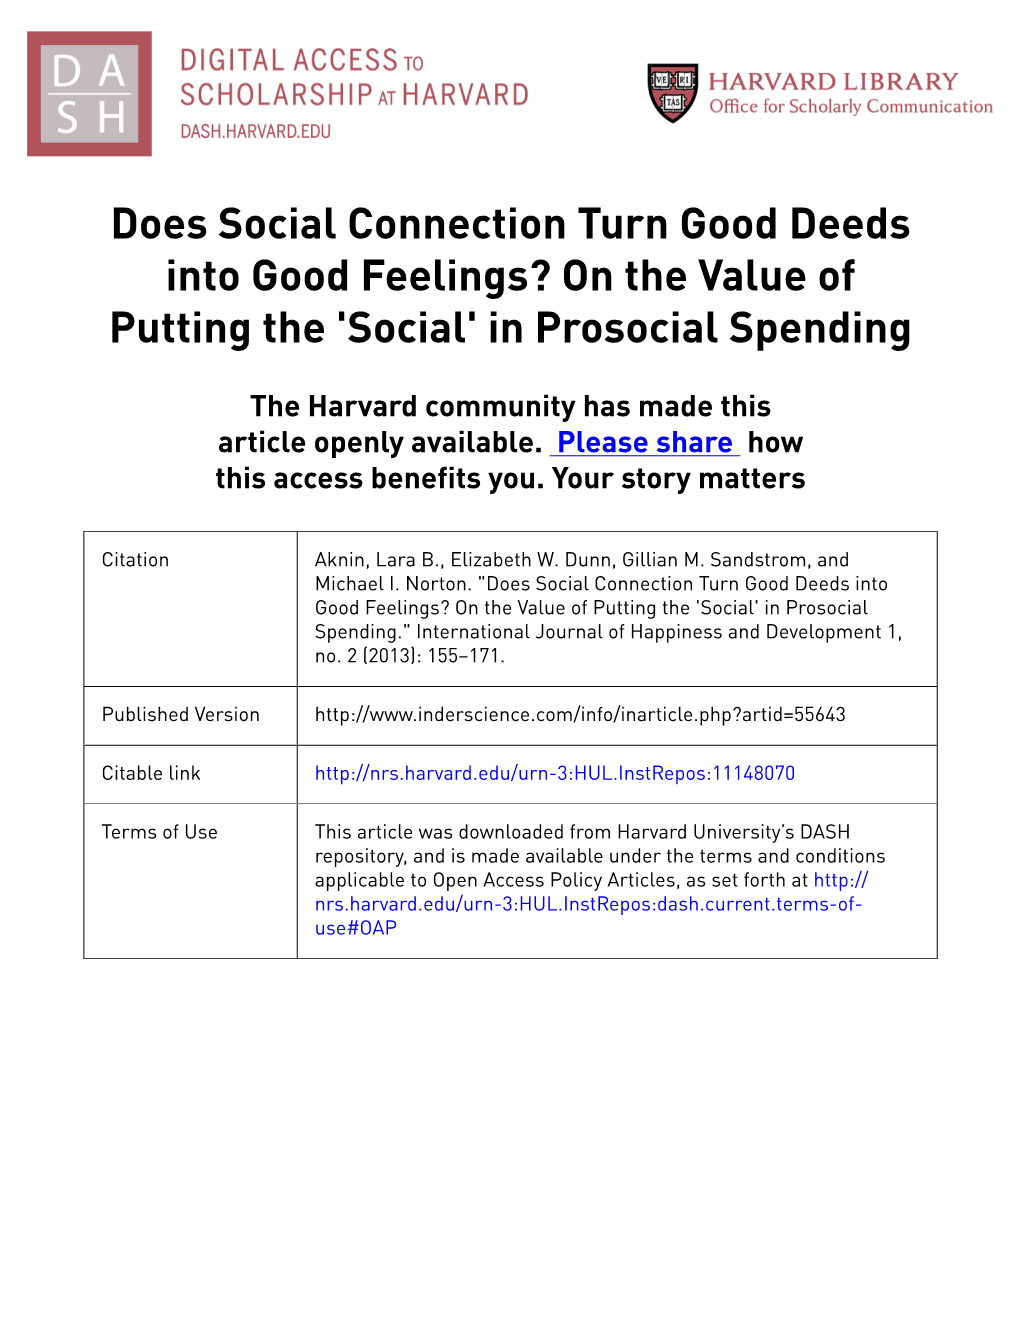 Does Social Connection Turn Good Deeds Into Good Feelings? on the Value of Putting the 'Social' in Prosocial Spending